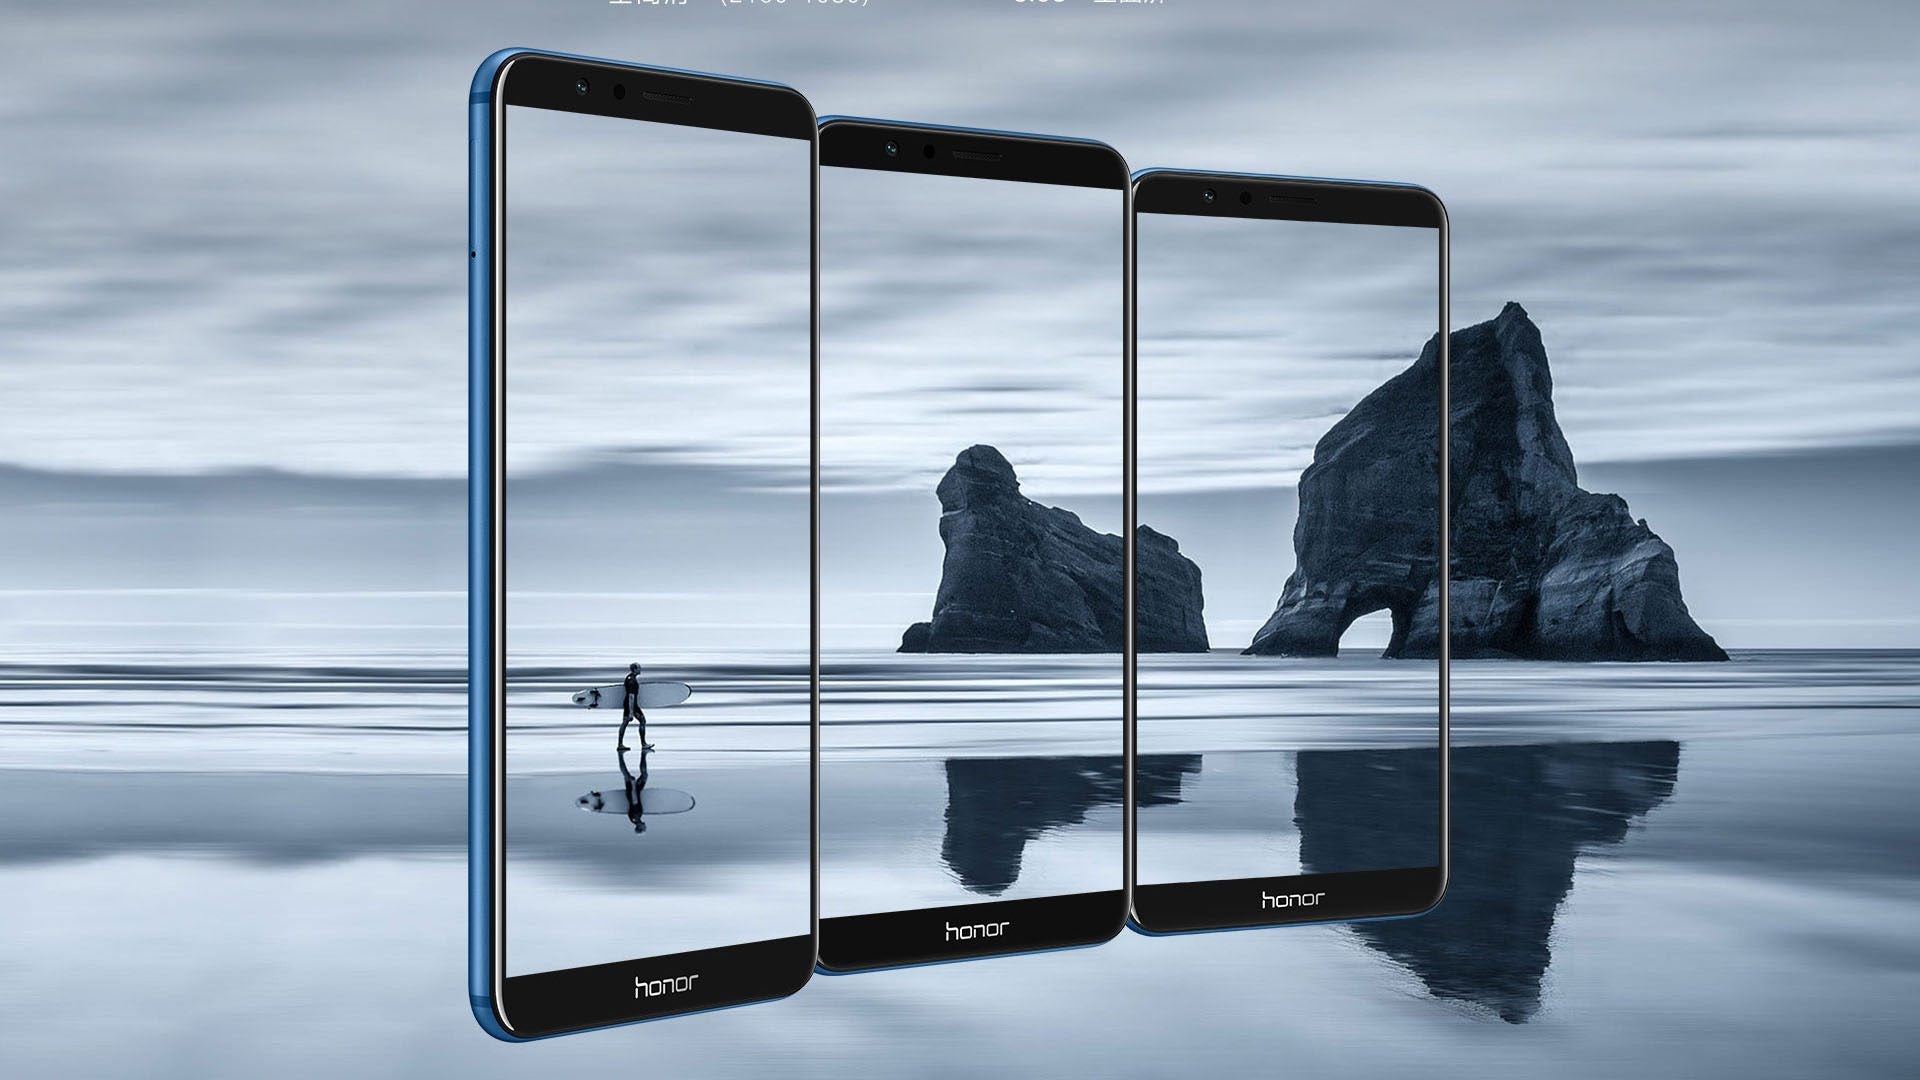 Honor 7X with 18:9 display and dual cameras goes official, prices start at $200